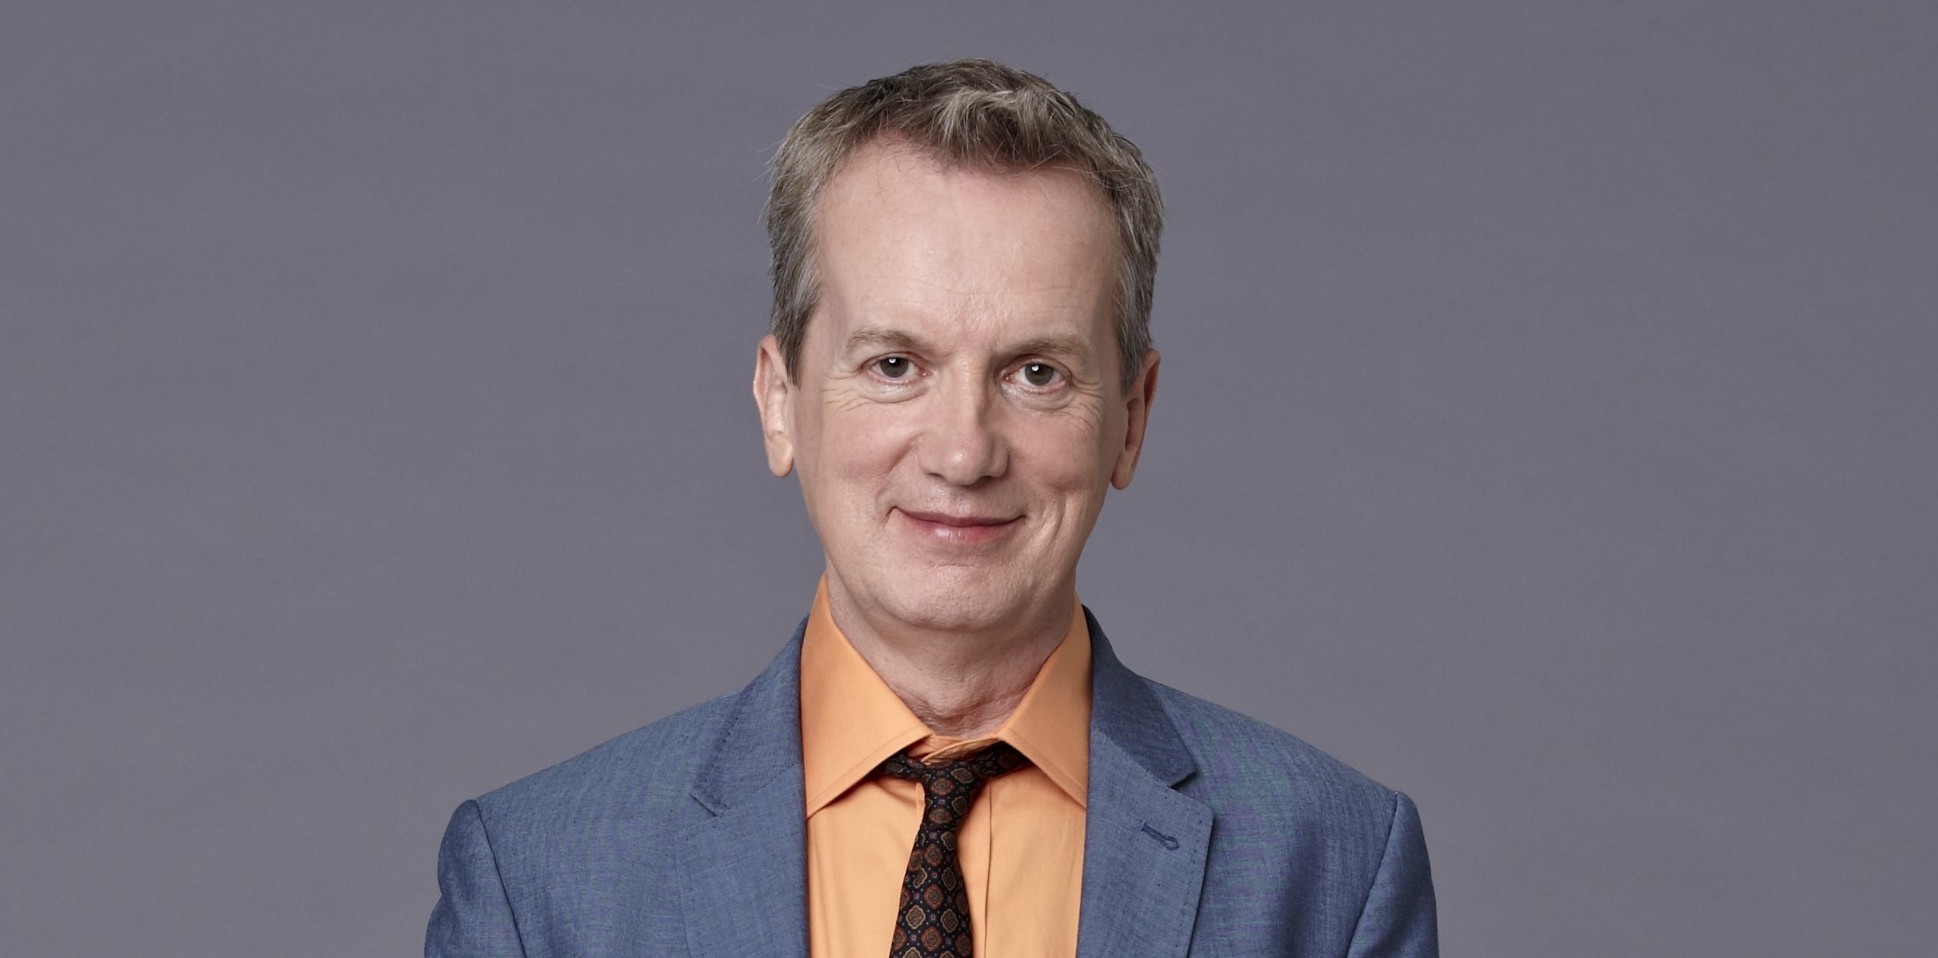 FRANK SKINNER ANNOUNCES MAN IN A SUIT UK TOUR